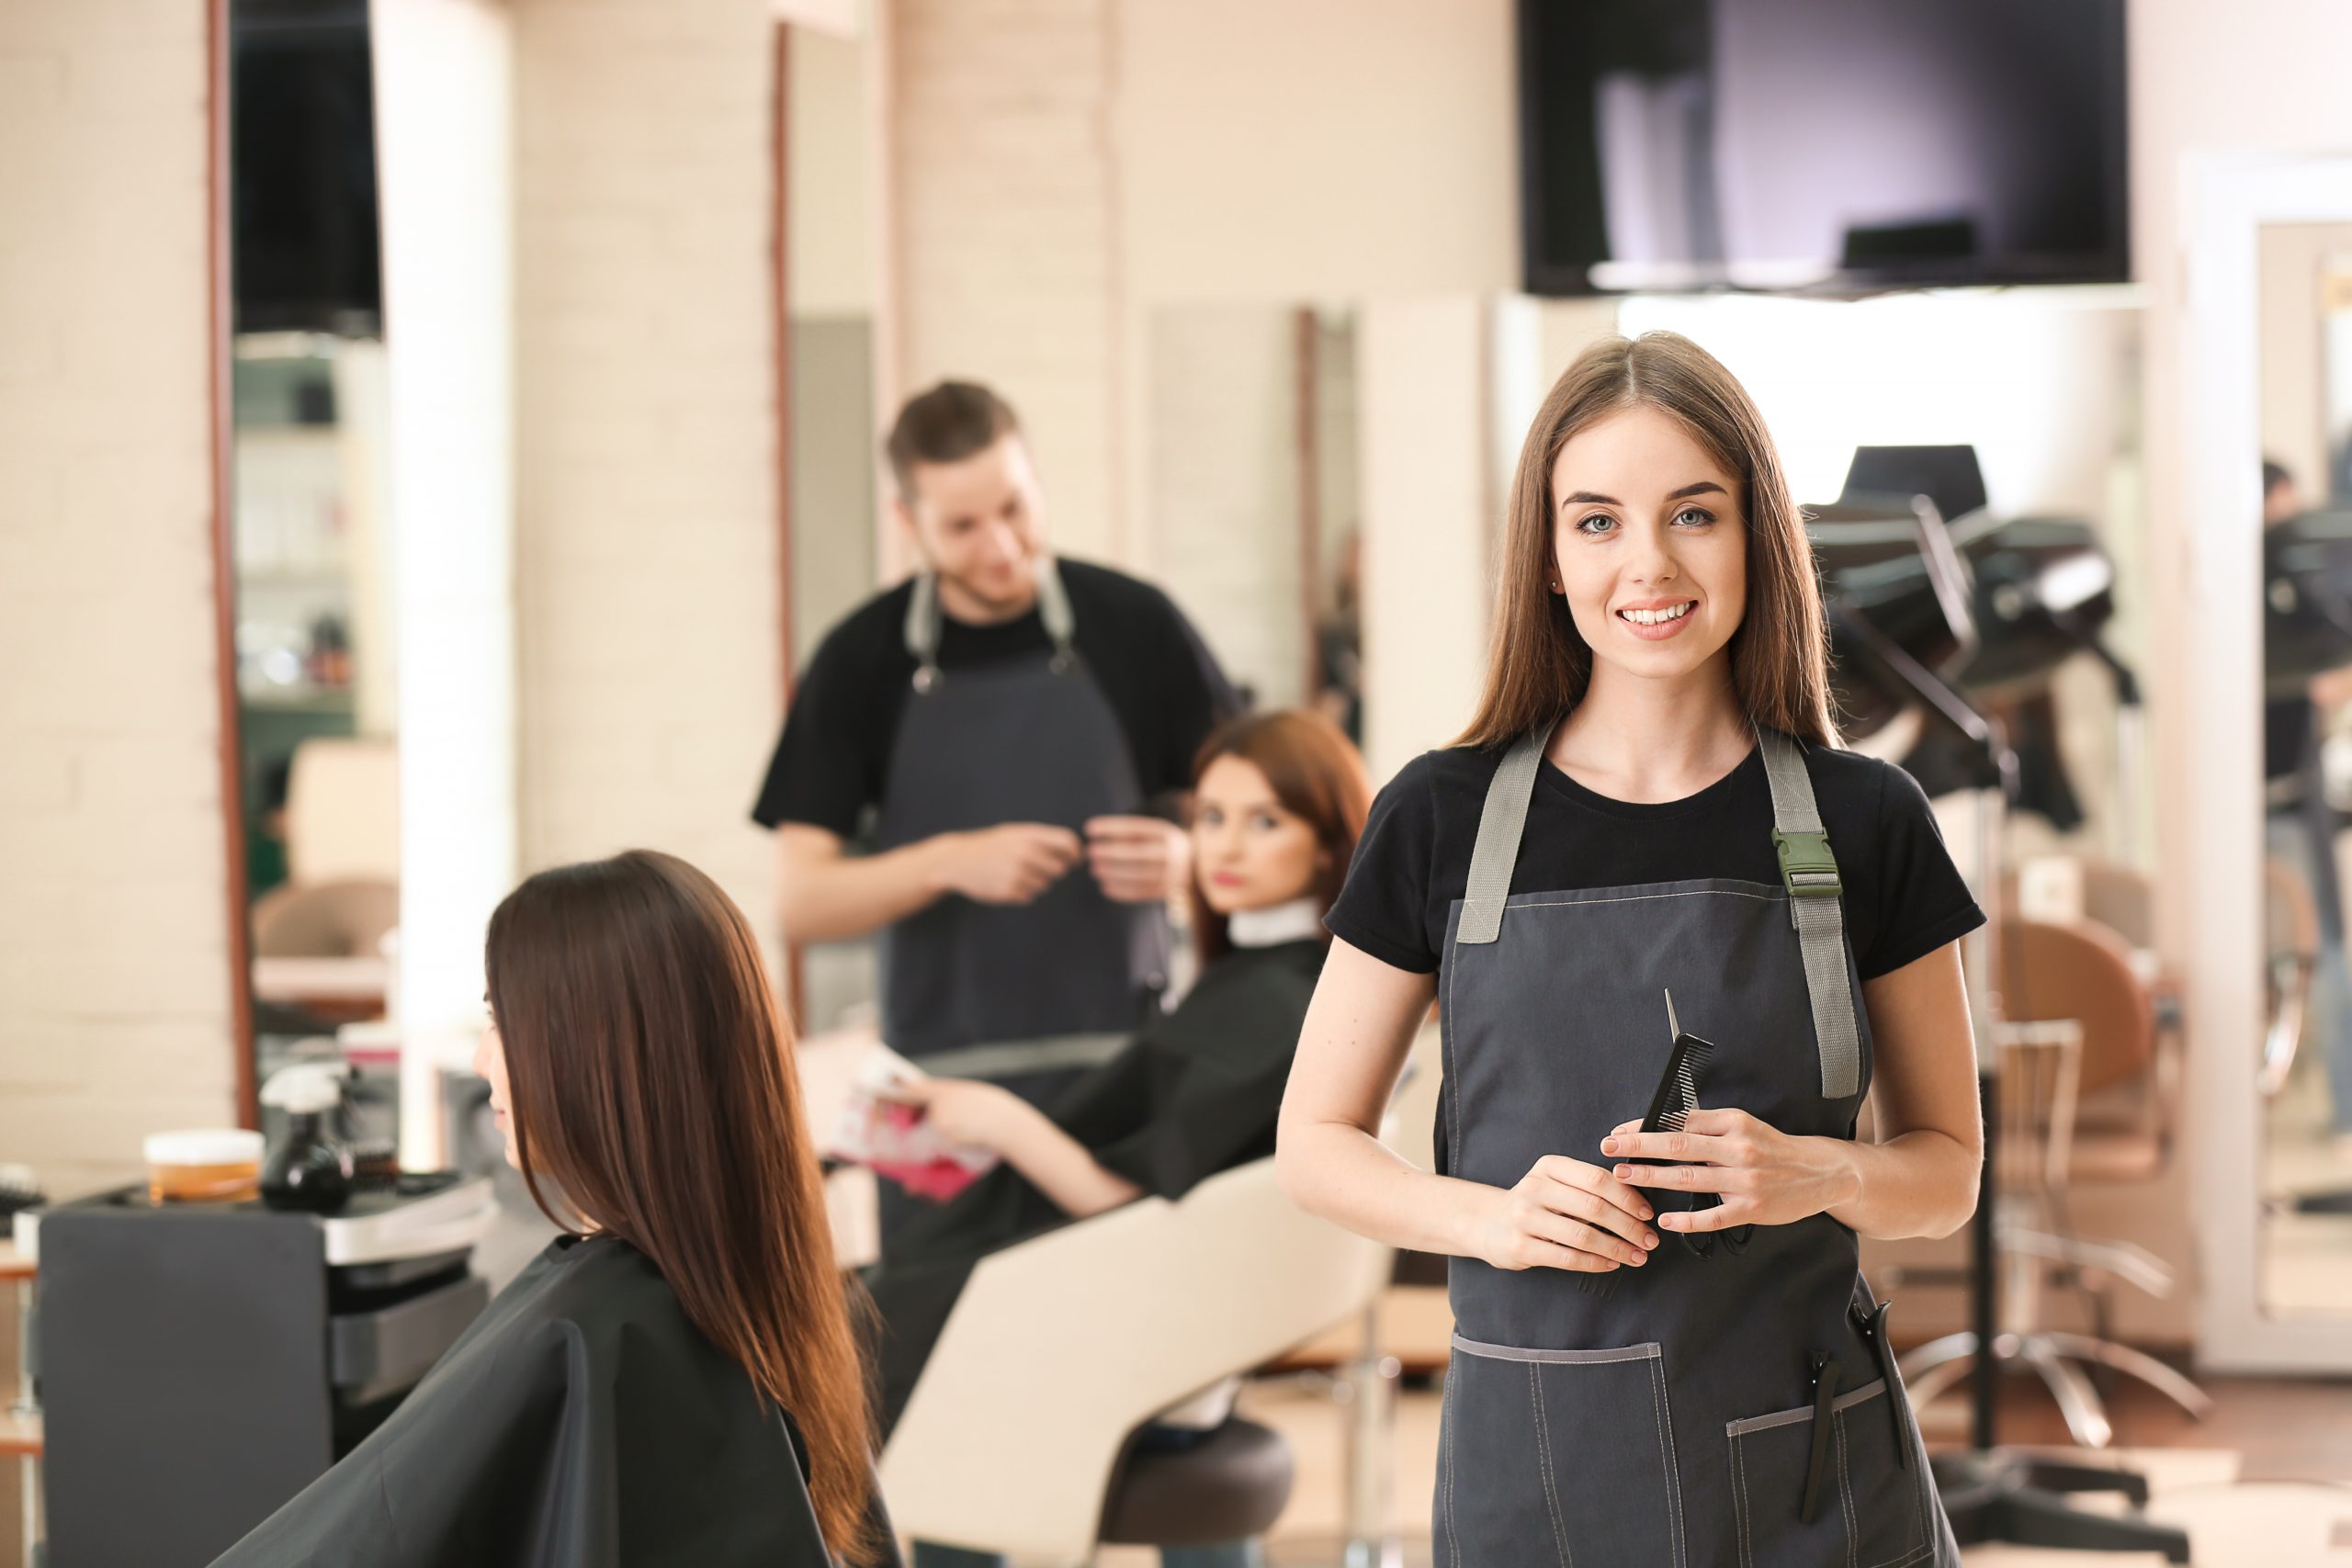 Tips for Getting a Job After Hair Design School